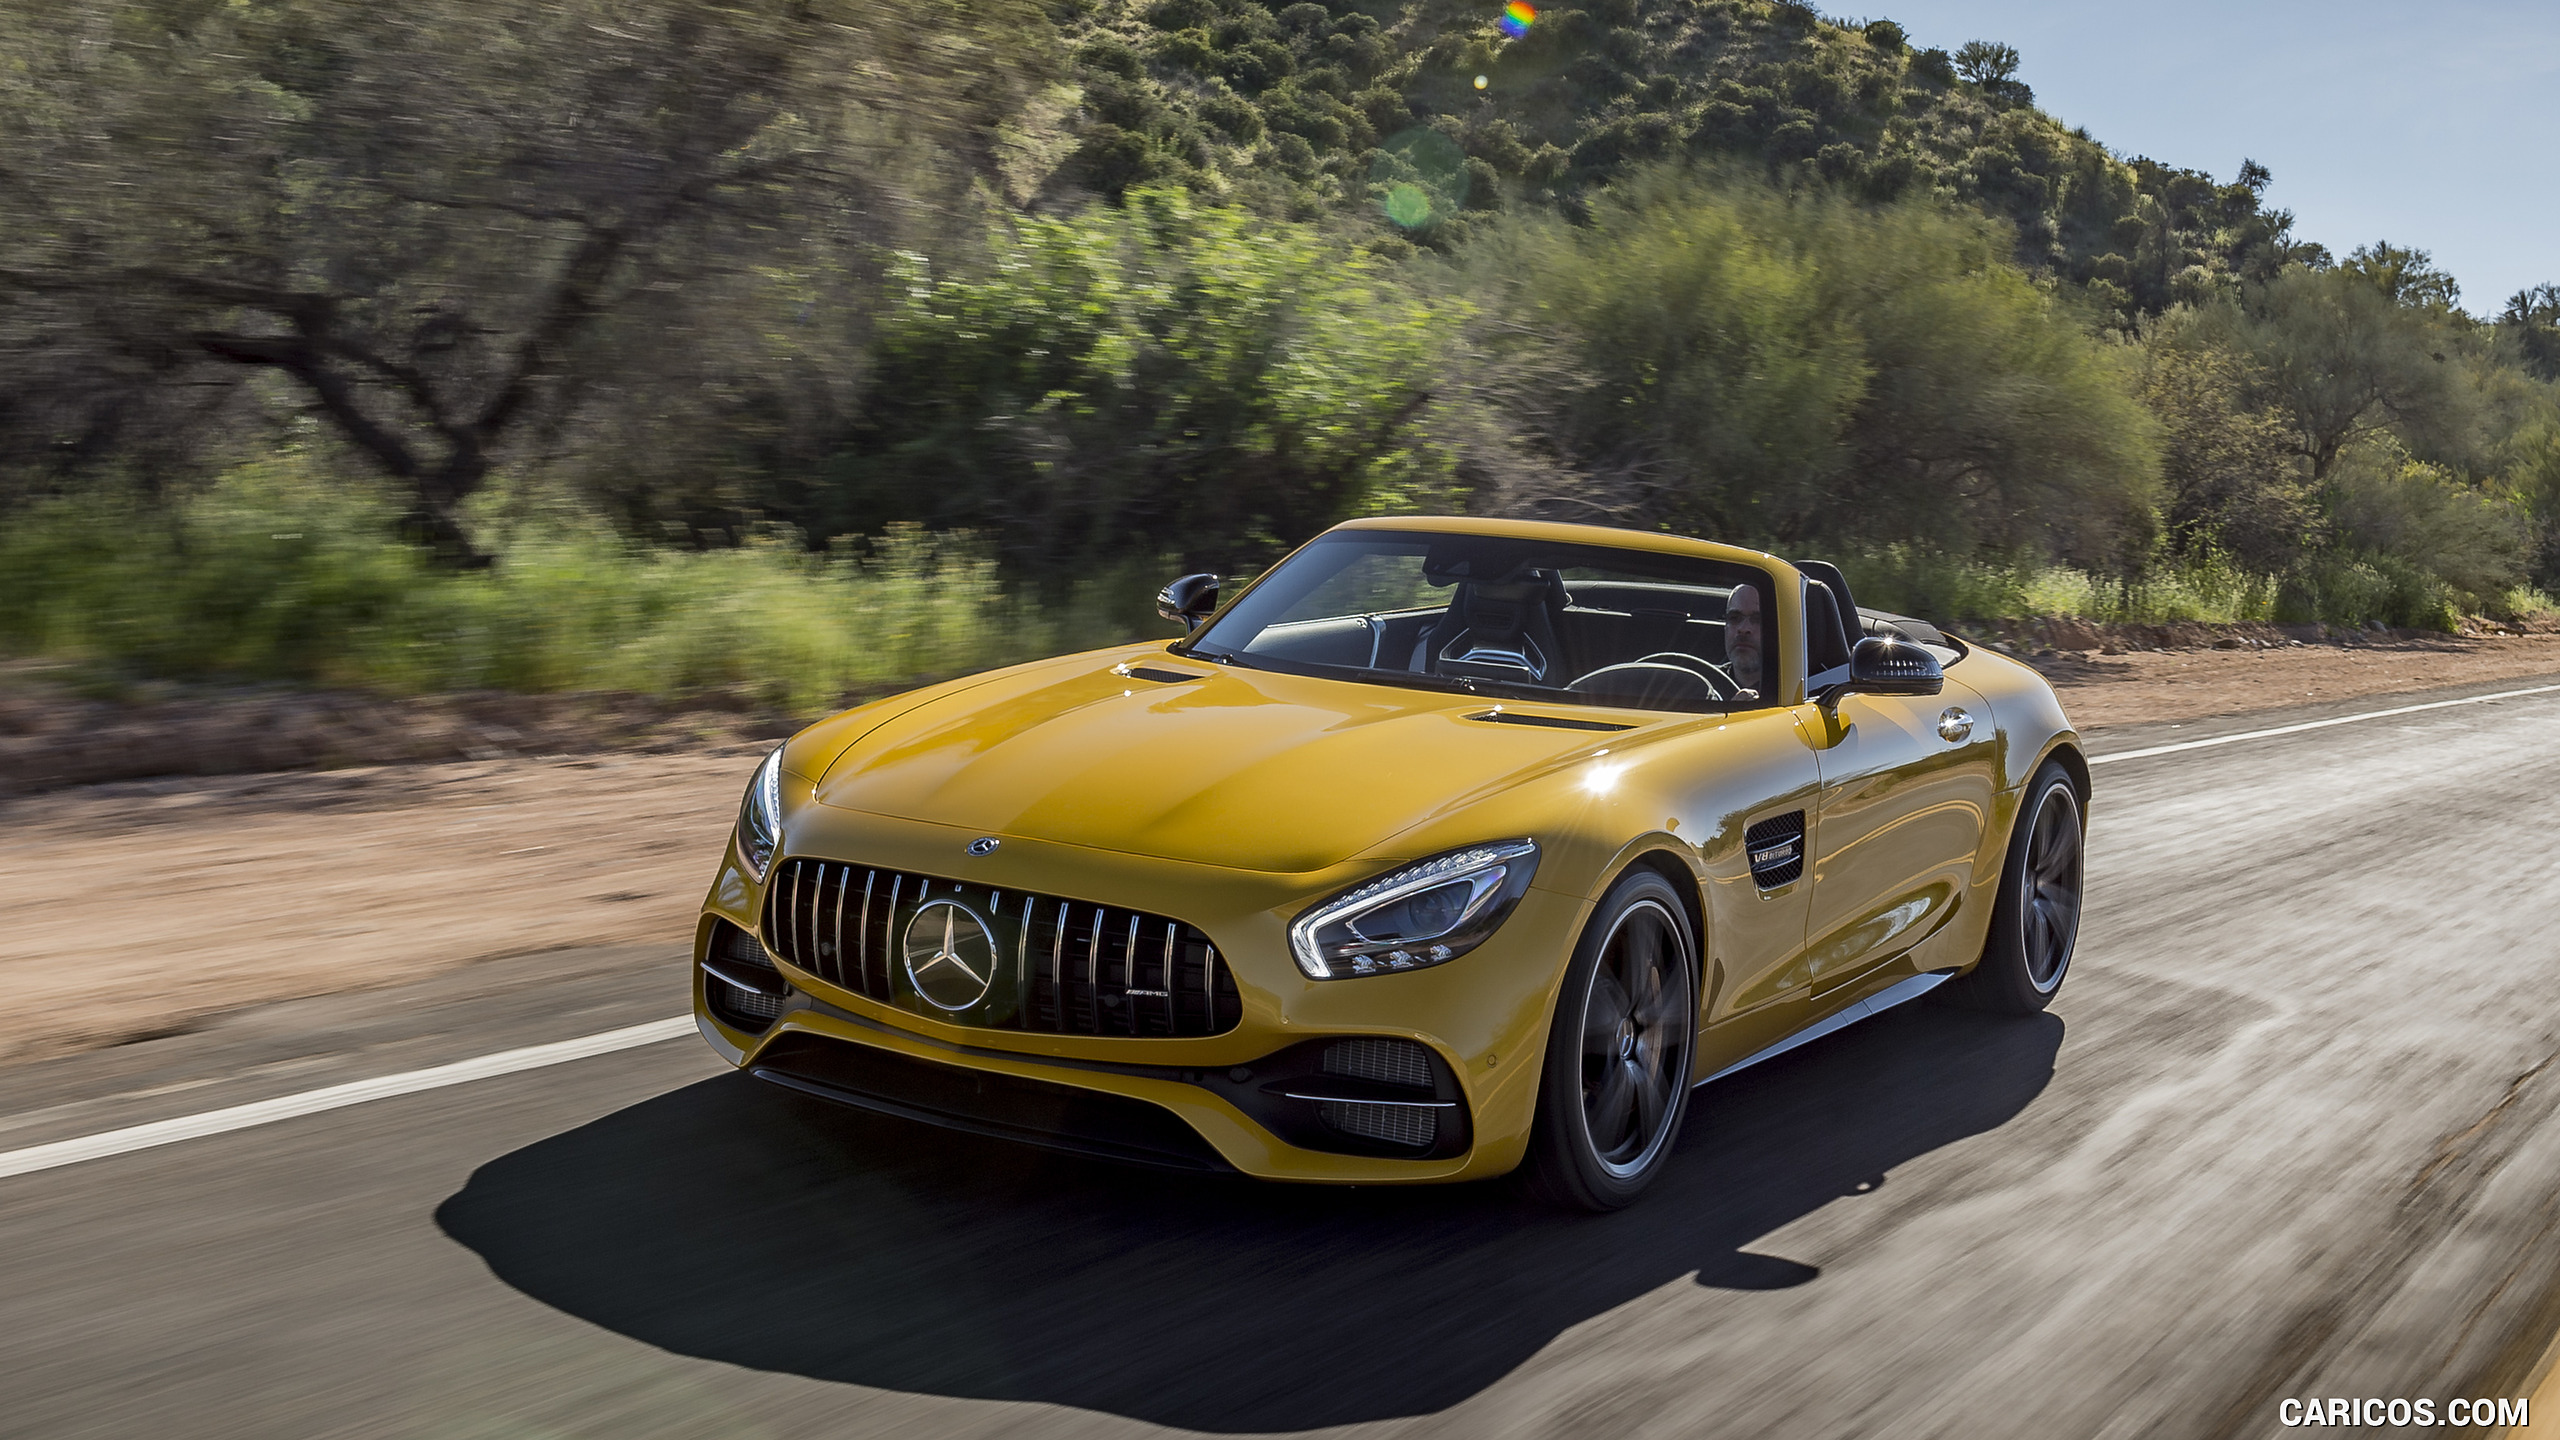 2018 Mercedes-AMG GT C Roadster - Front Three-Quarter, #226 of 350